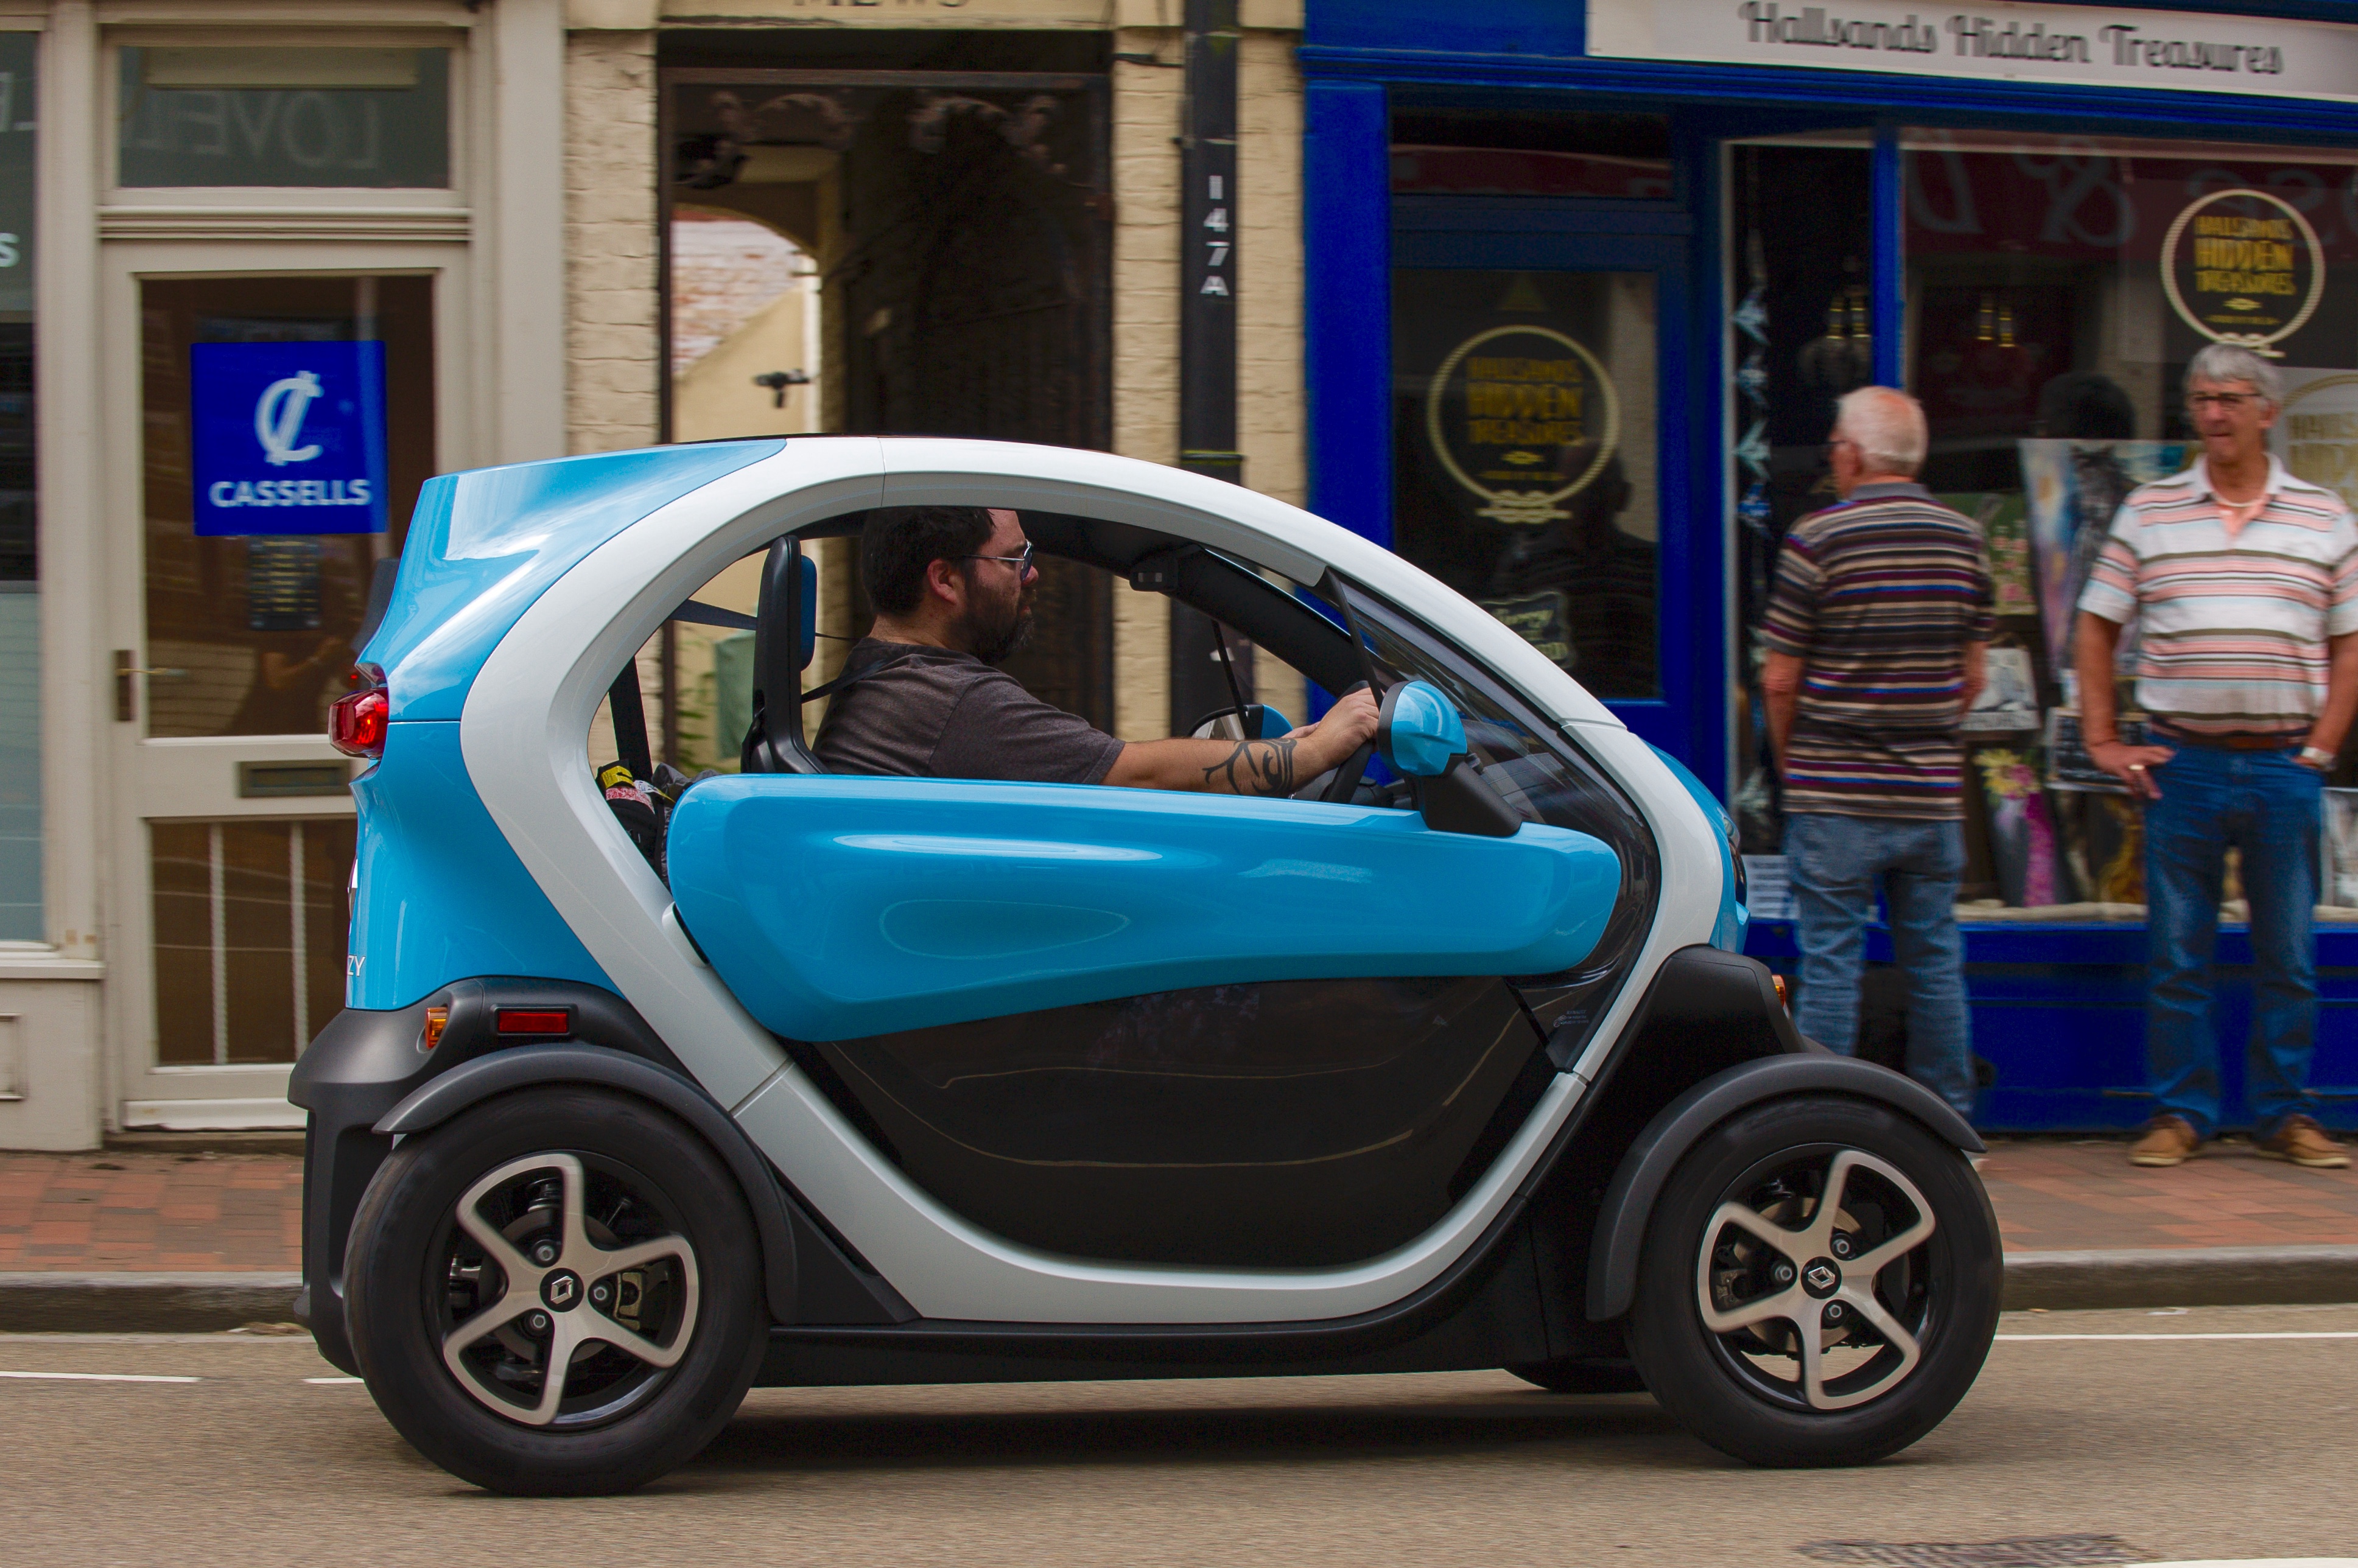 Side view of Keith WR Jones driving a blue and white Renault Twizy